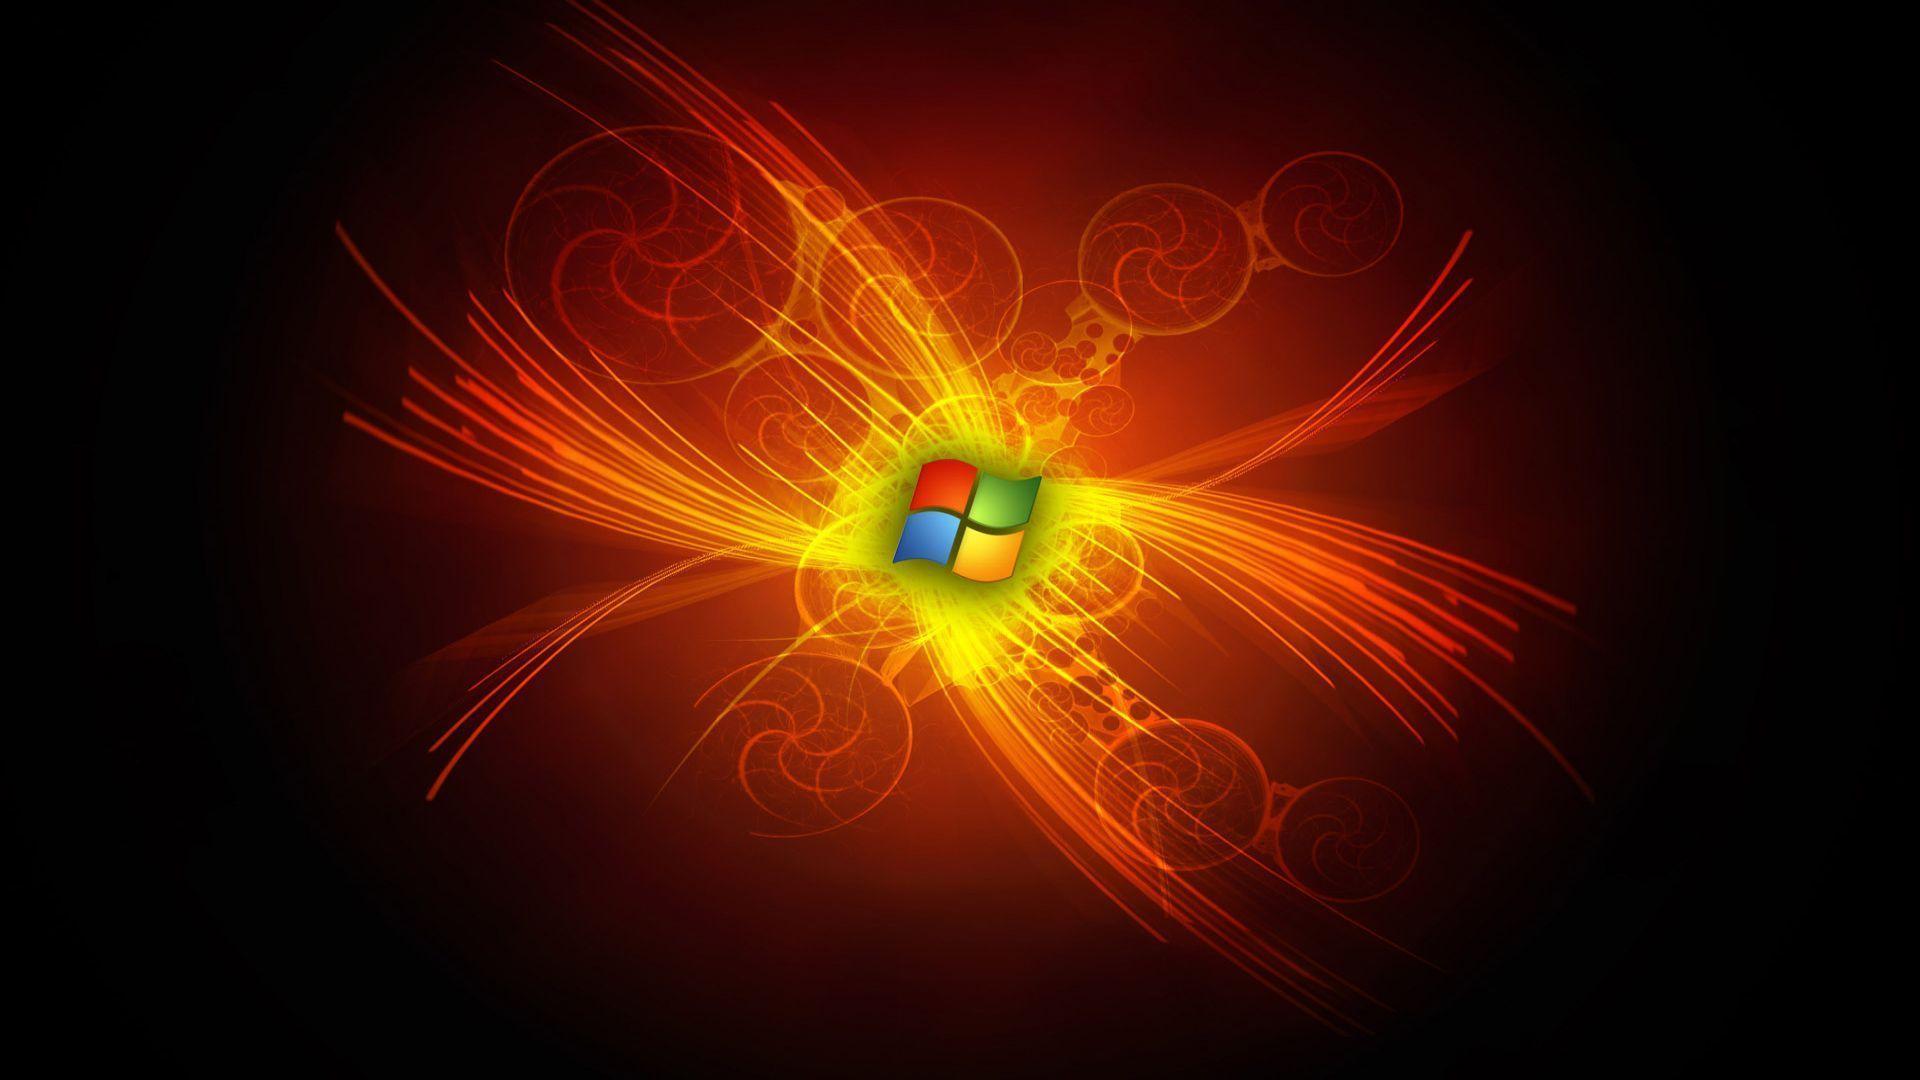 Wallpapers For > Full Hd Wallpapers For Windows 7 1920x1080